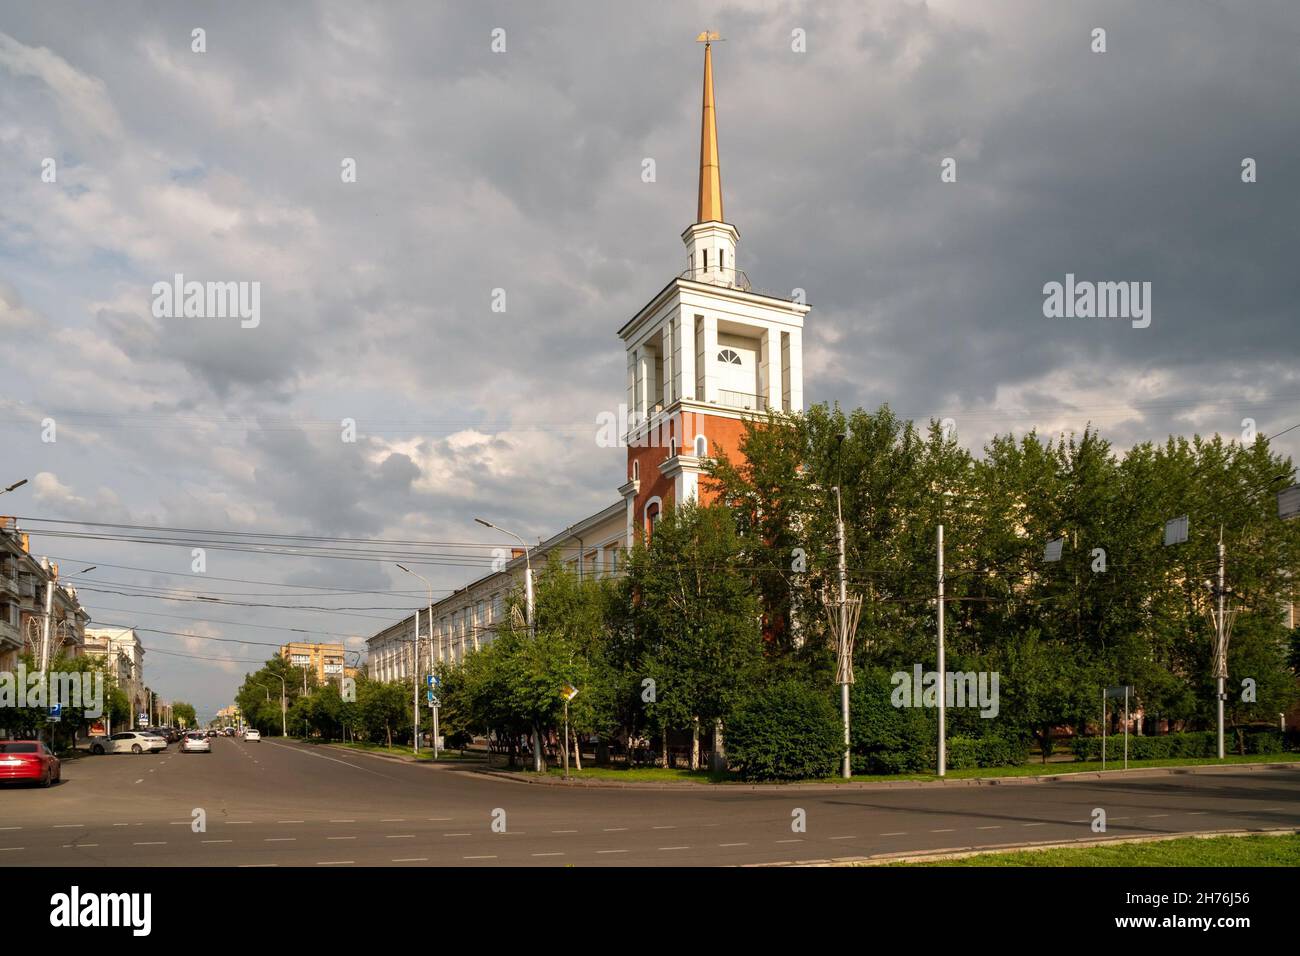 An administrative building with a spire tower is located at the corner of Karl Marx and Robespierre streets on a summer day in the city of Krasnoyarsk Stock Photo